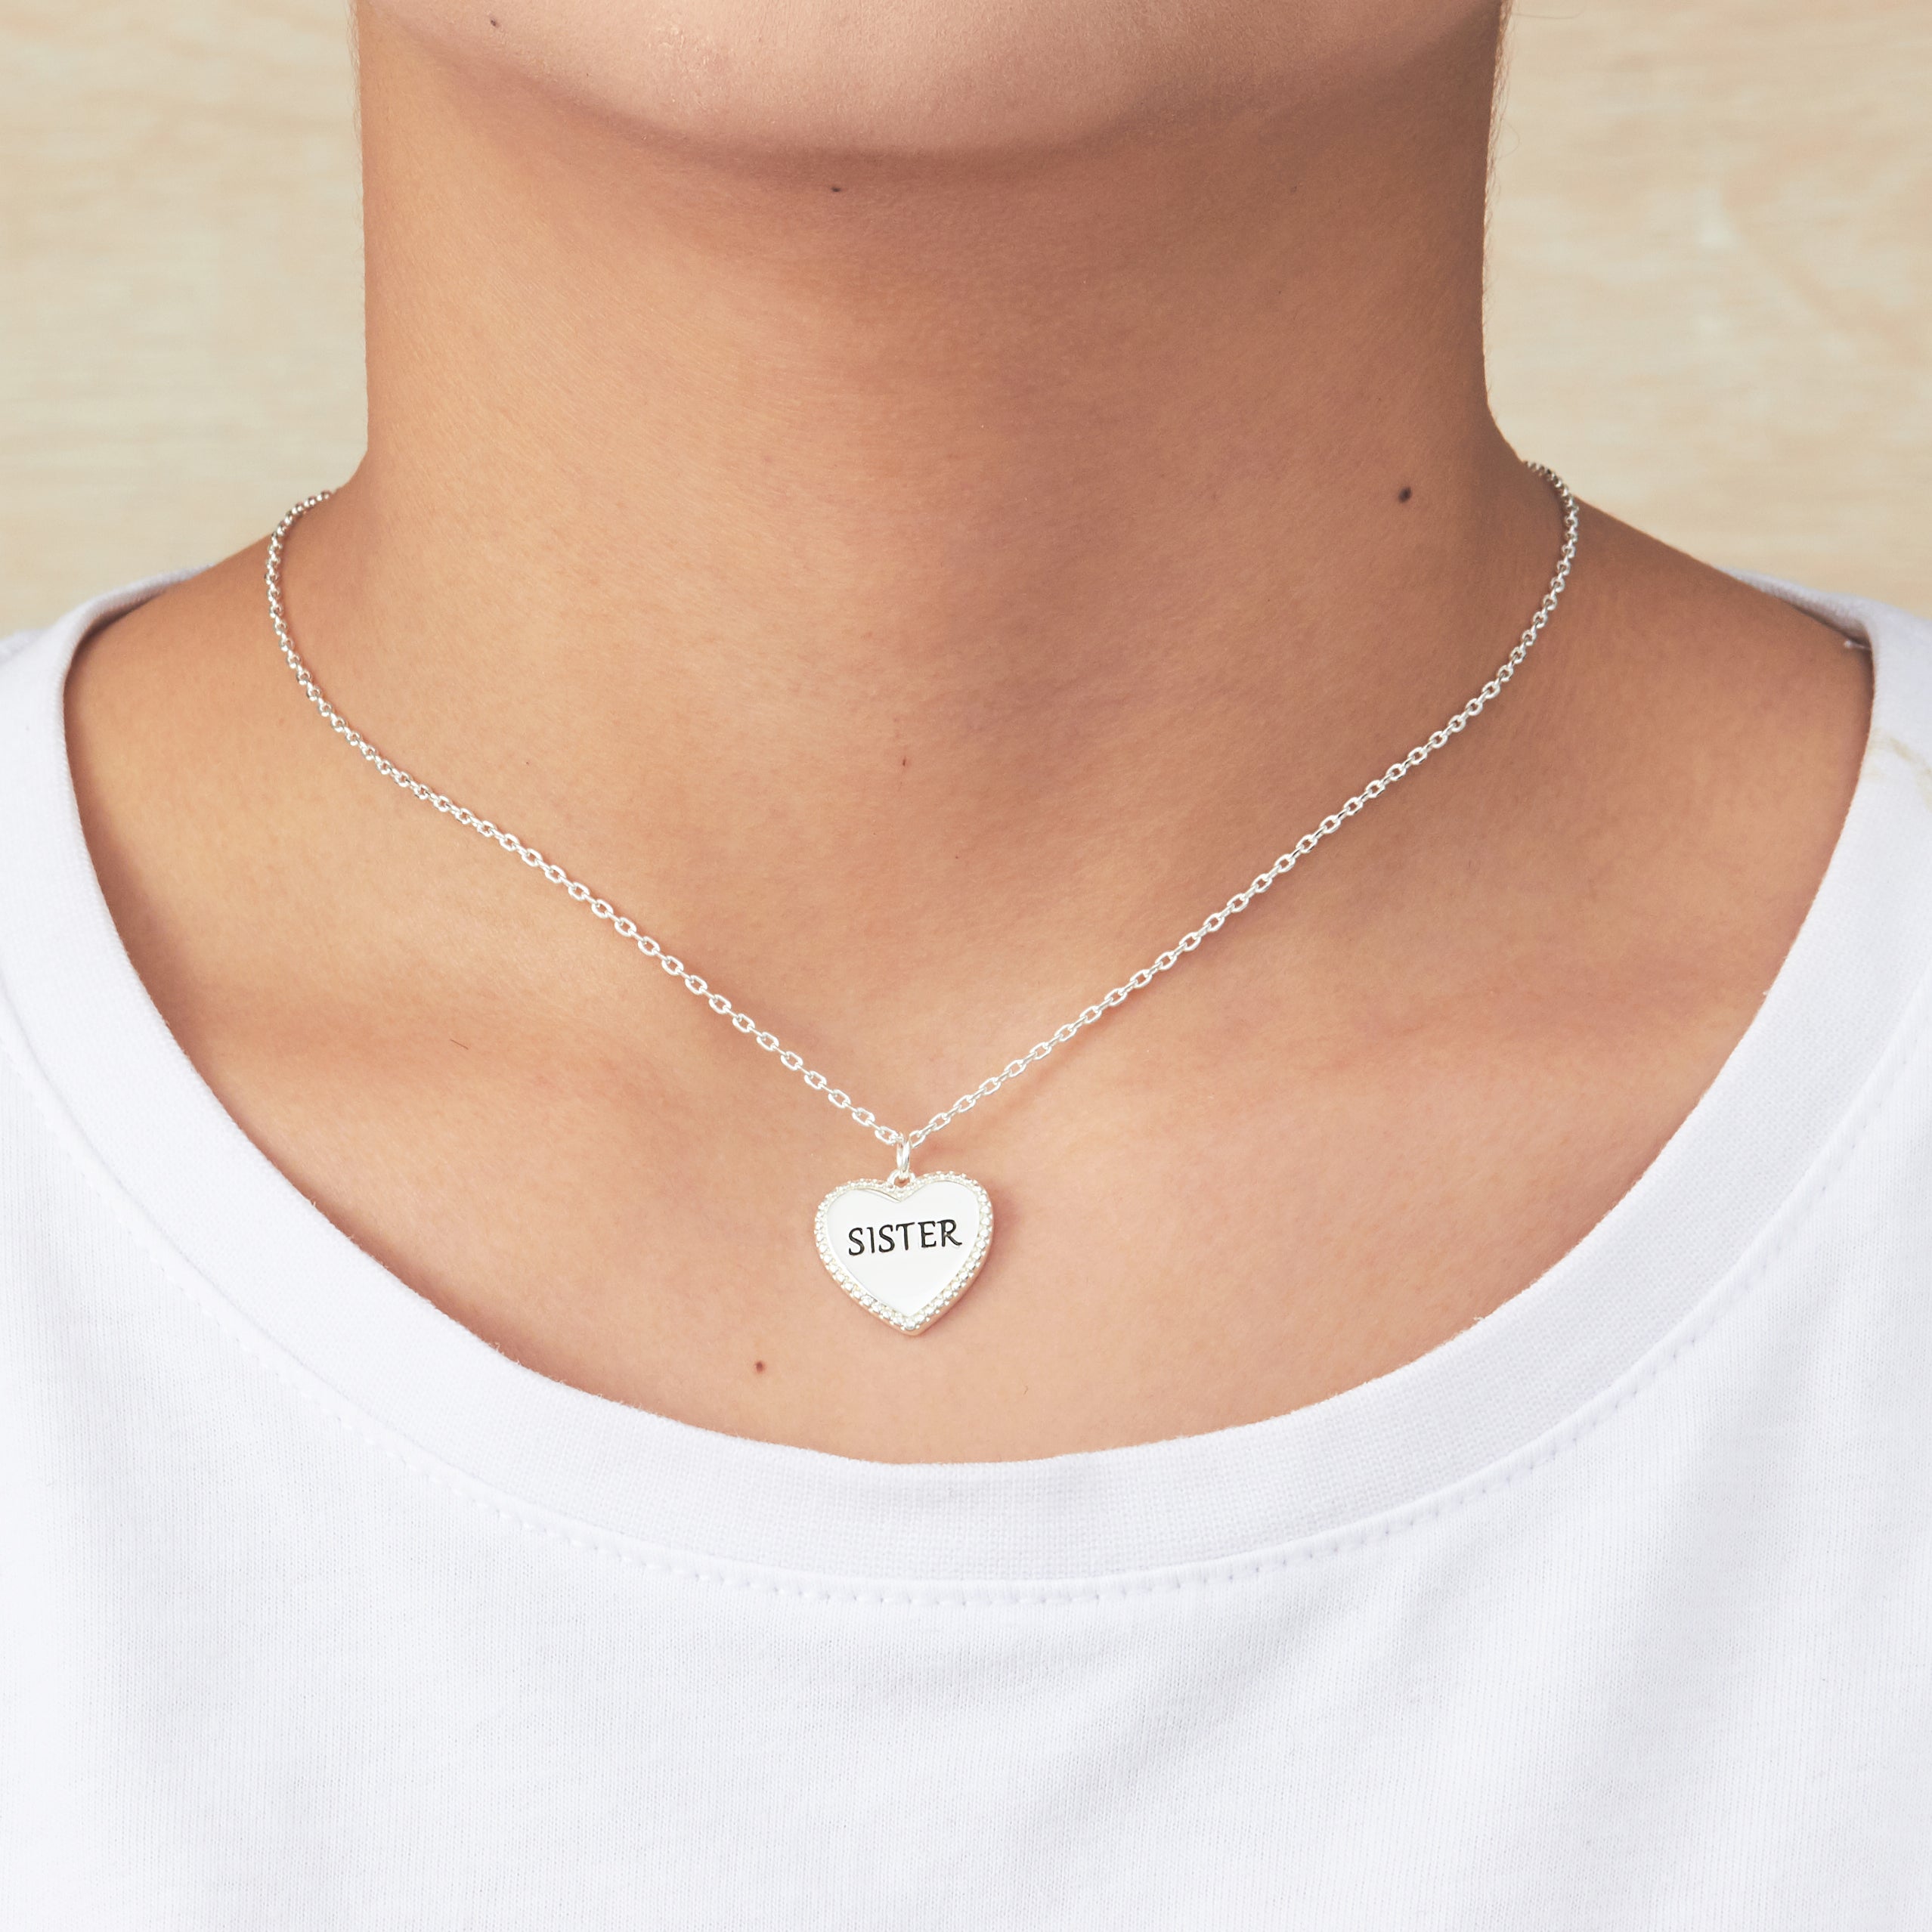 Silver Plated Filigree Heart Sister Necklace